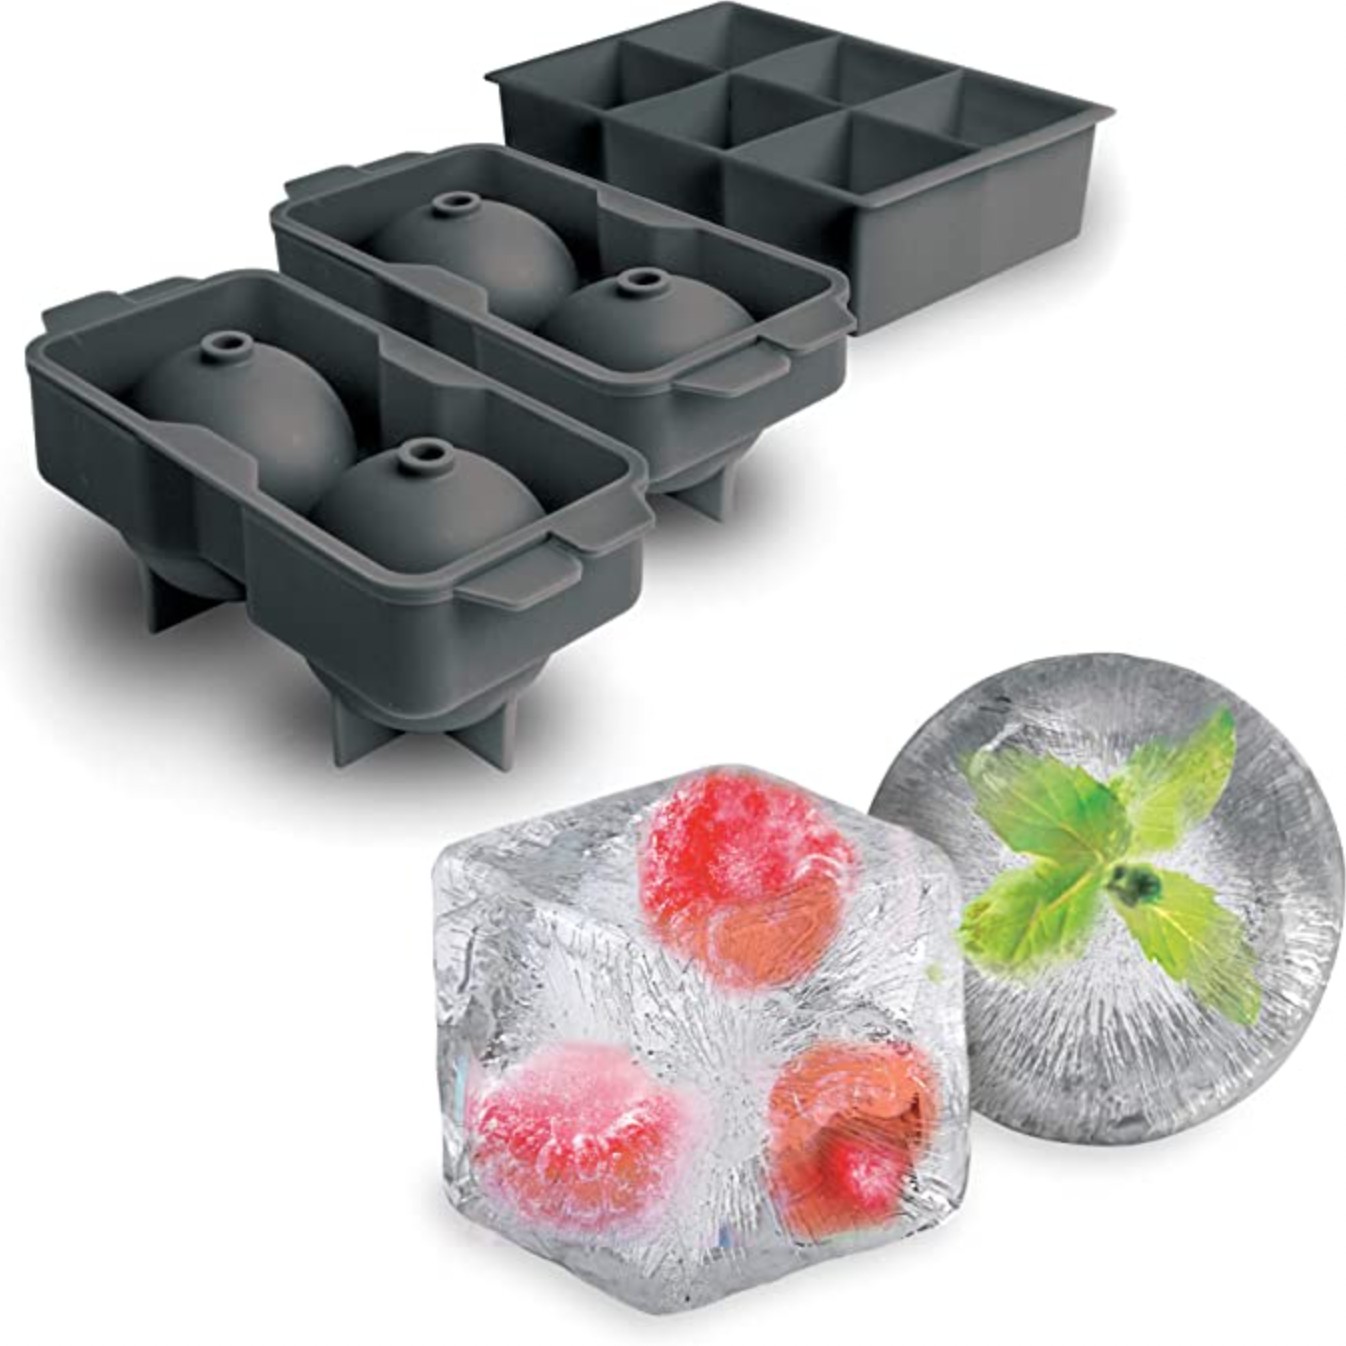 The Best Big Ice Cube Trays for Perfect Cocktails